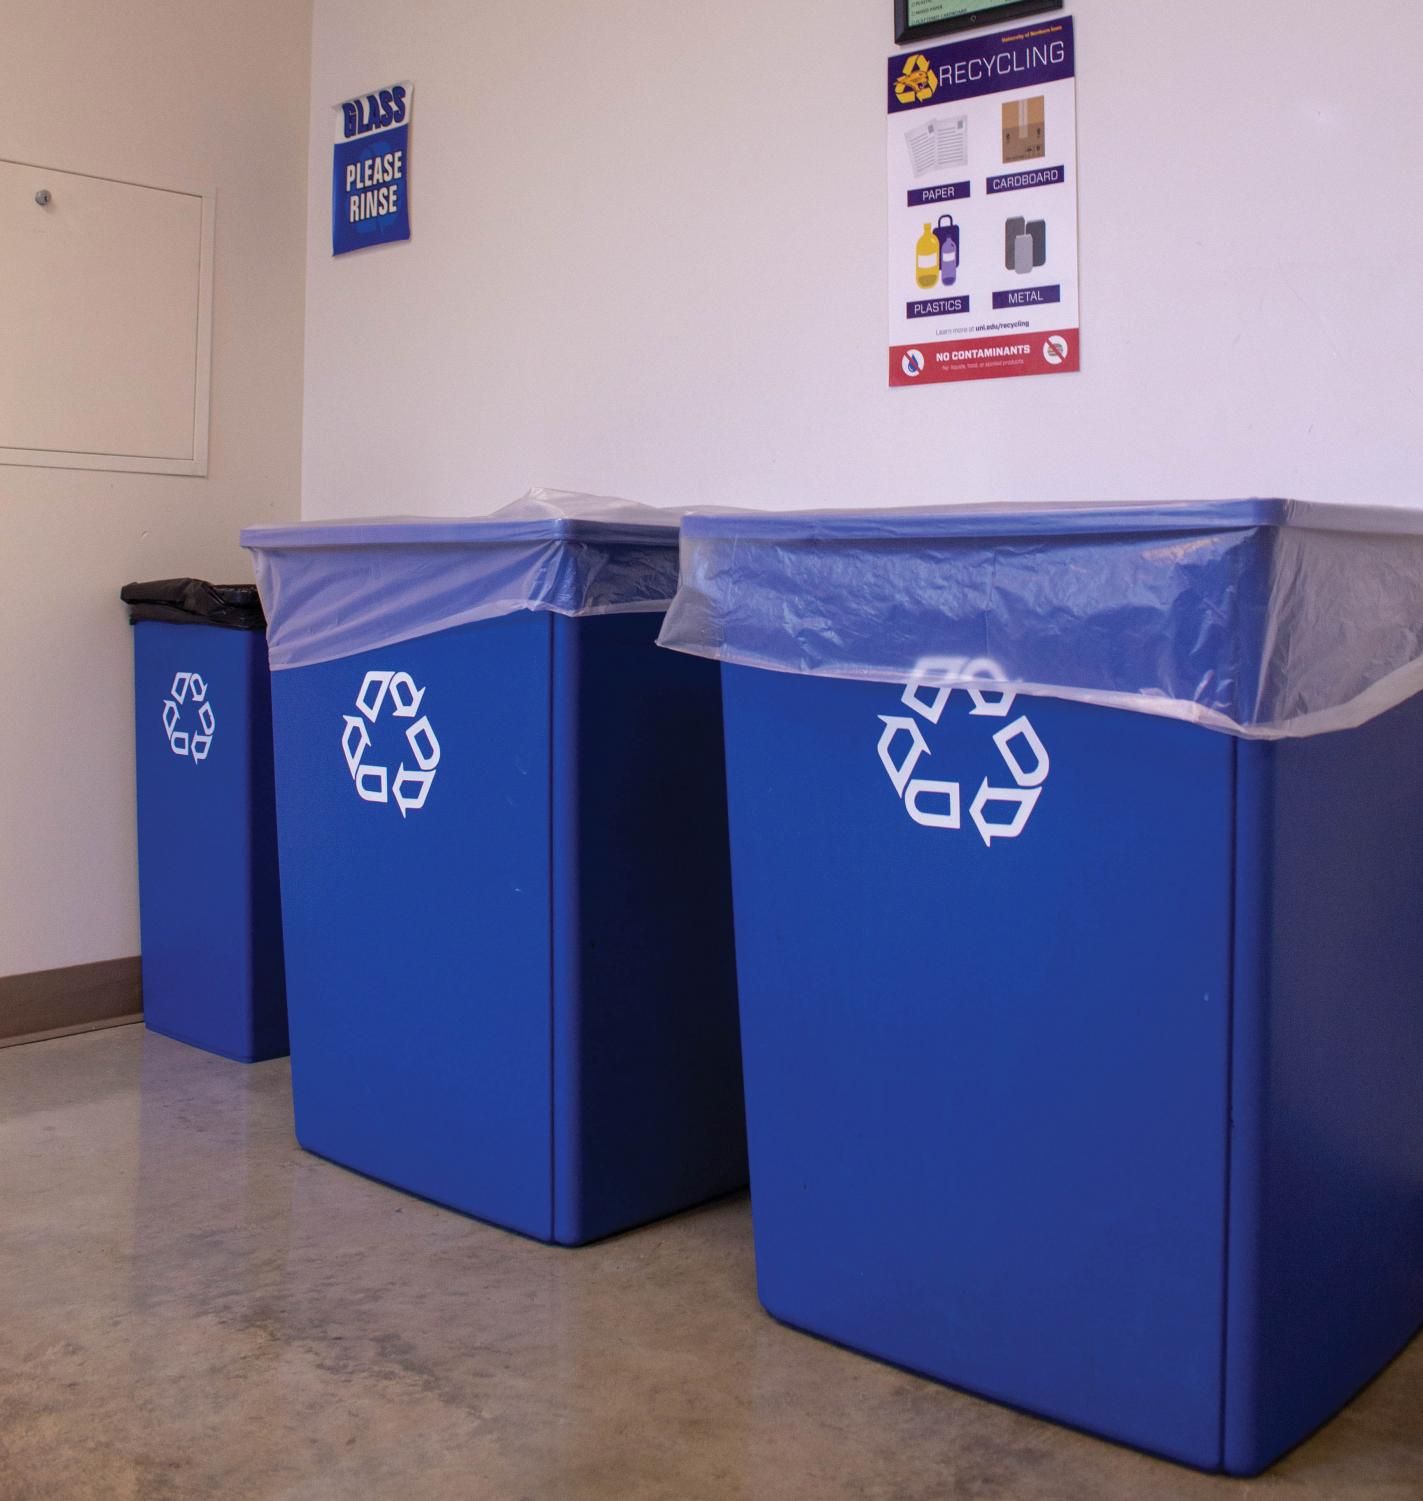 Recycling+changes+coming+to+campus